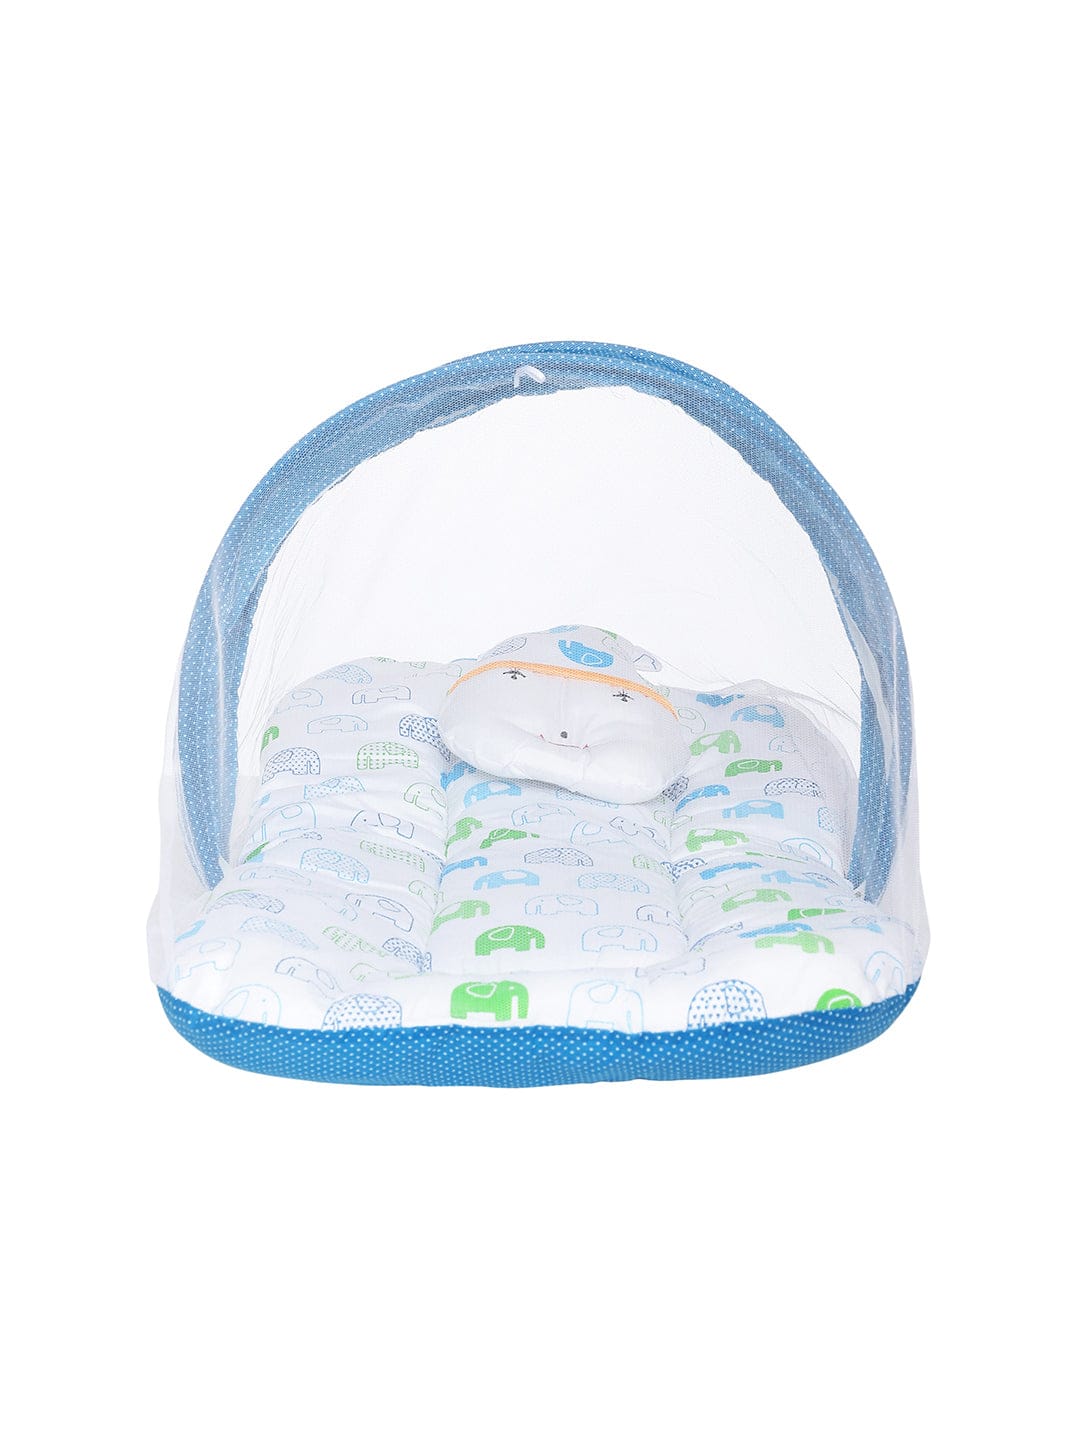 Infants Printed Bedding Set with Mosquito Net (White & Blue)